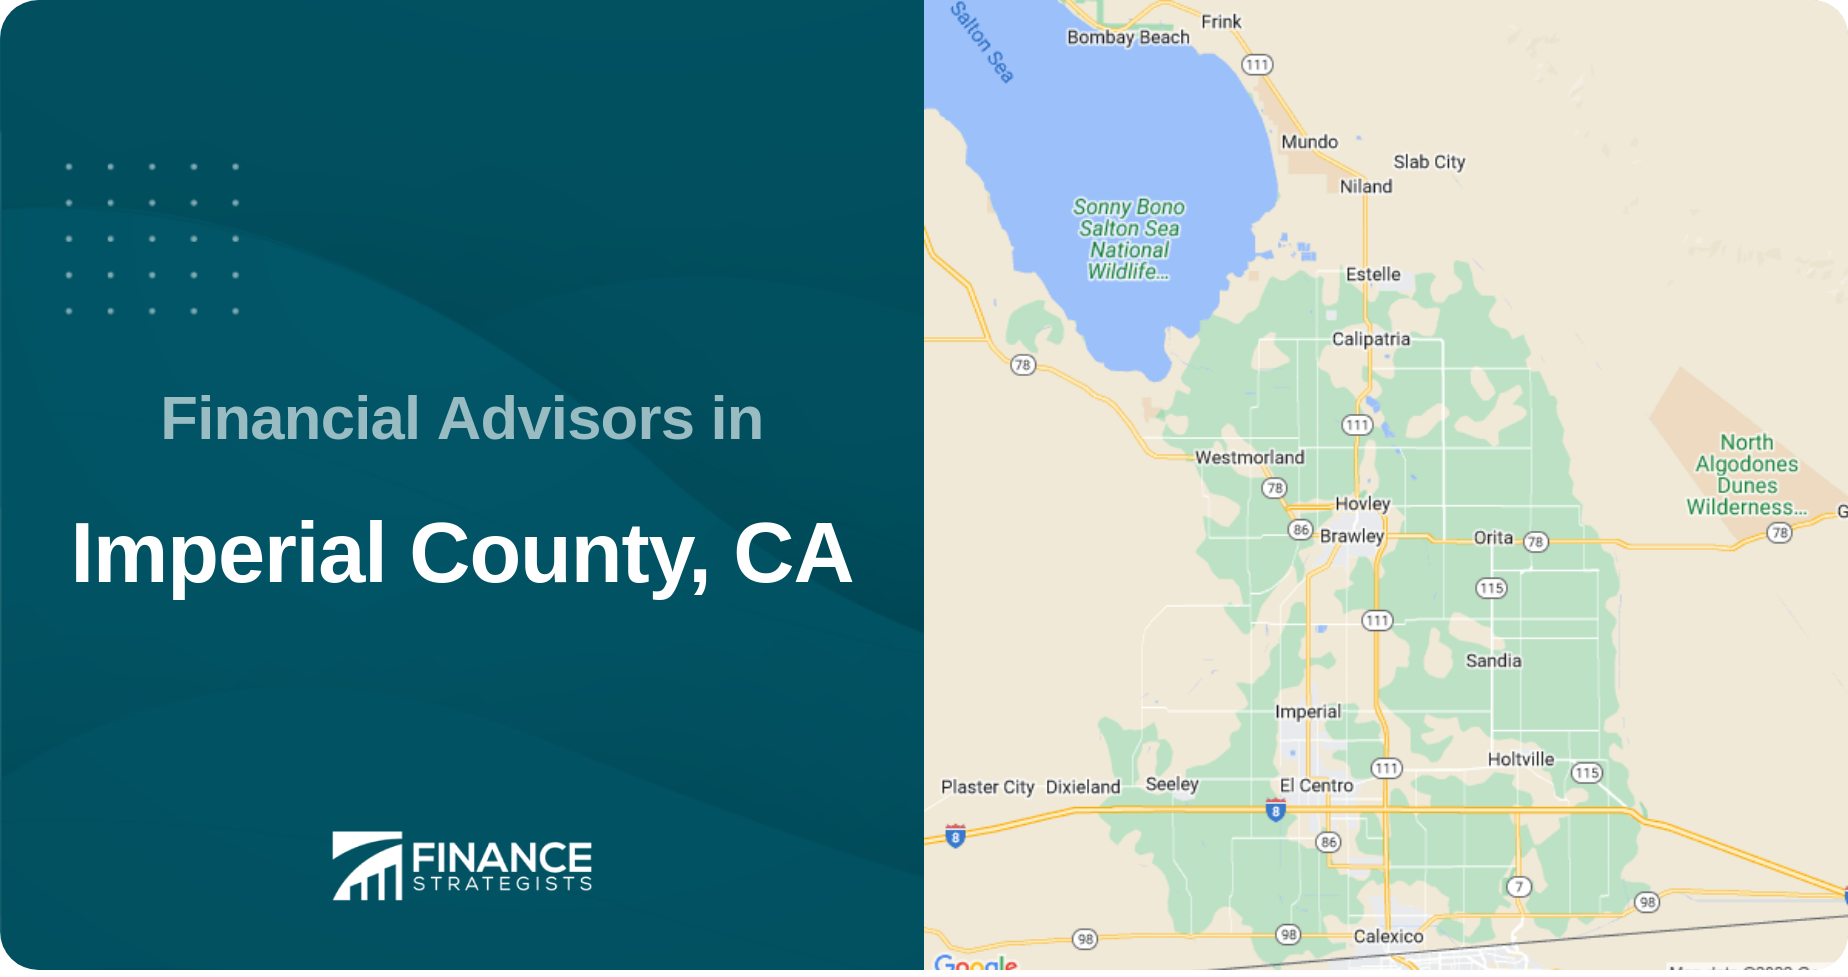 Financial Advisors in Imperial County, CA